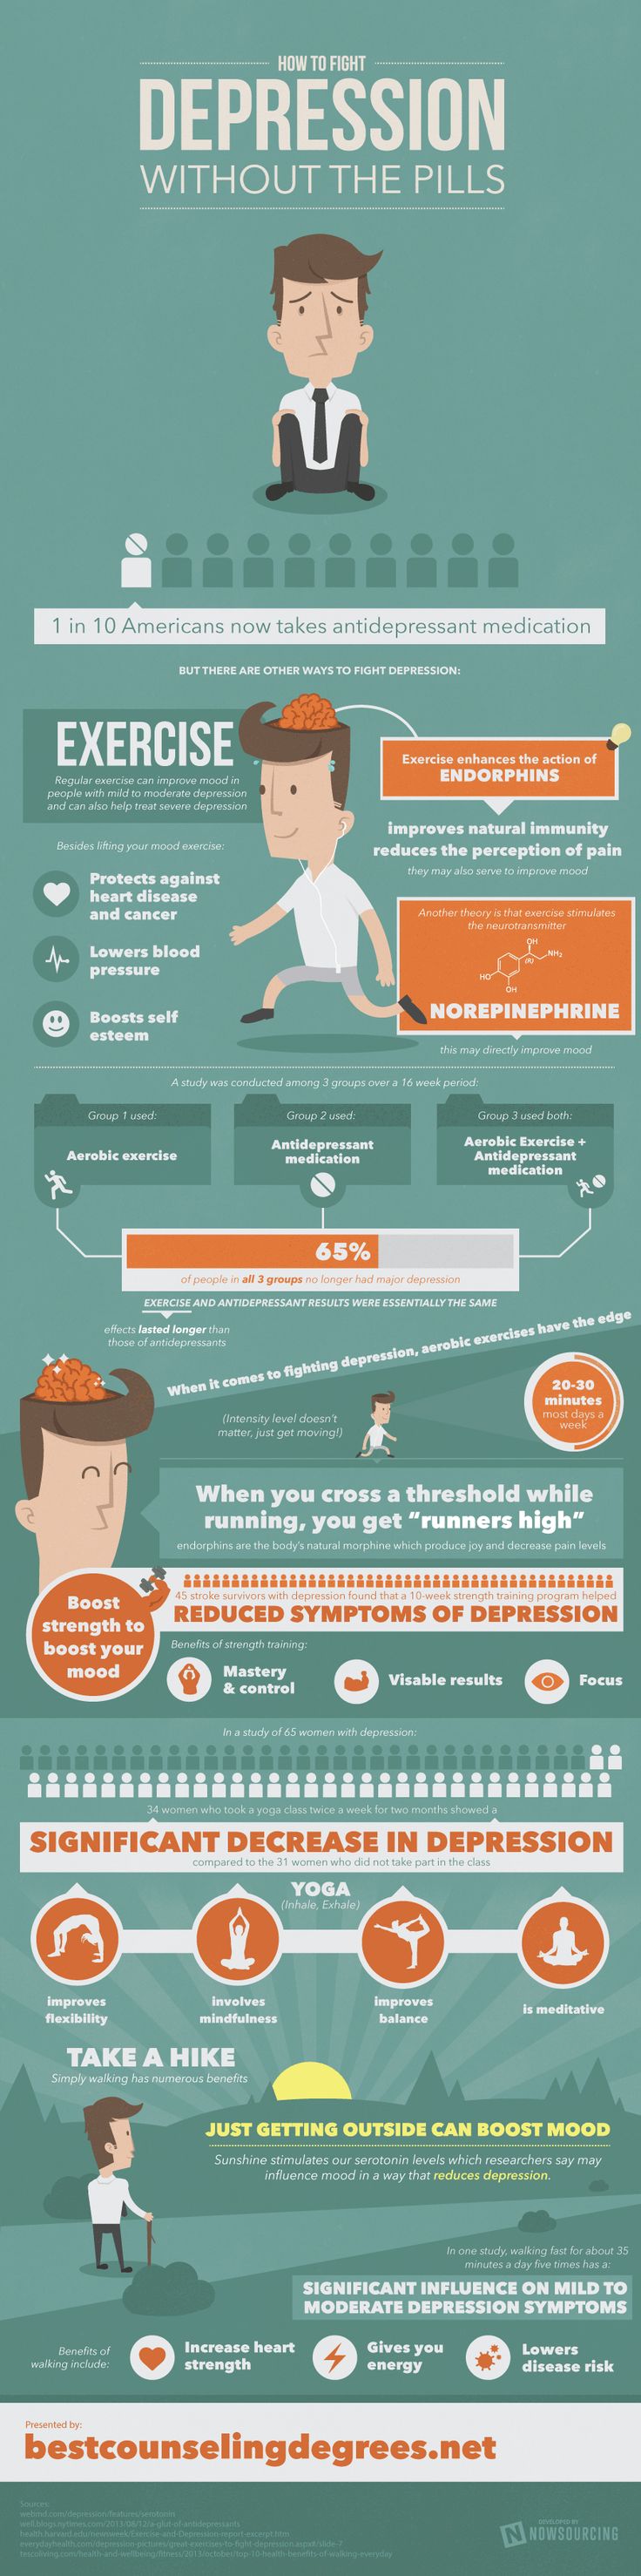 Fighting Depression Without Pills: Is It Possible? Infographic